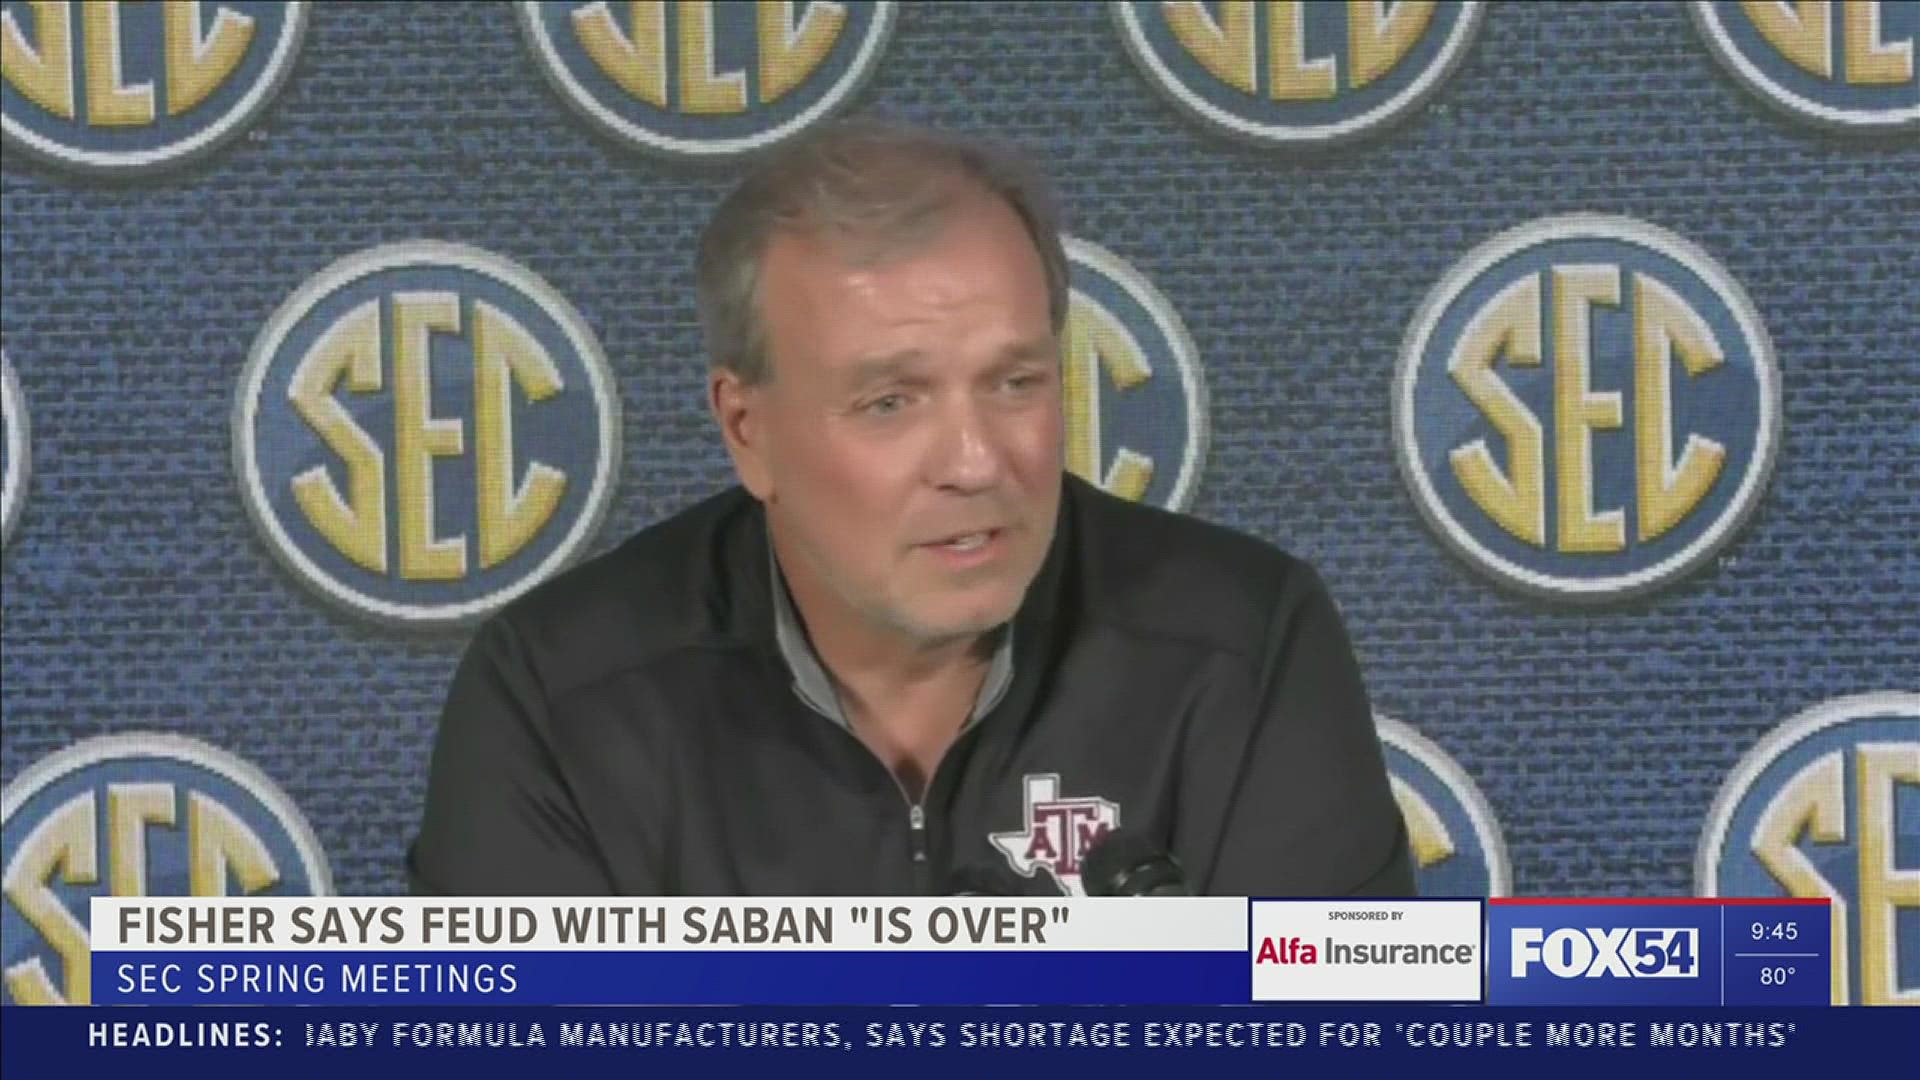 The public spat between Texas A&M coach Jimbo Fisher and Alabama’s Nick Saban appears to be over. Fisher says he is moving on from the public war of words.